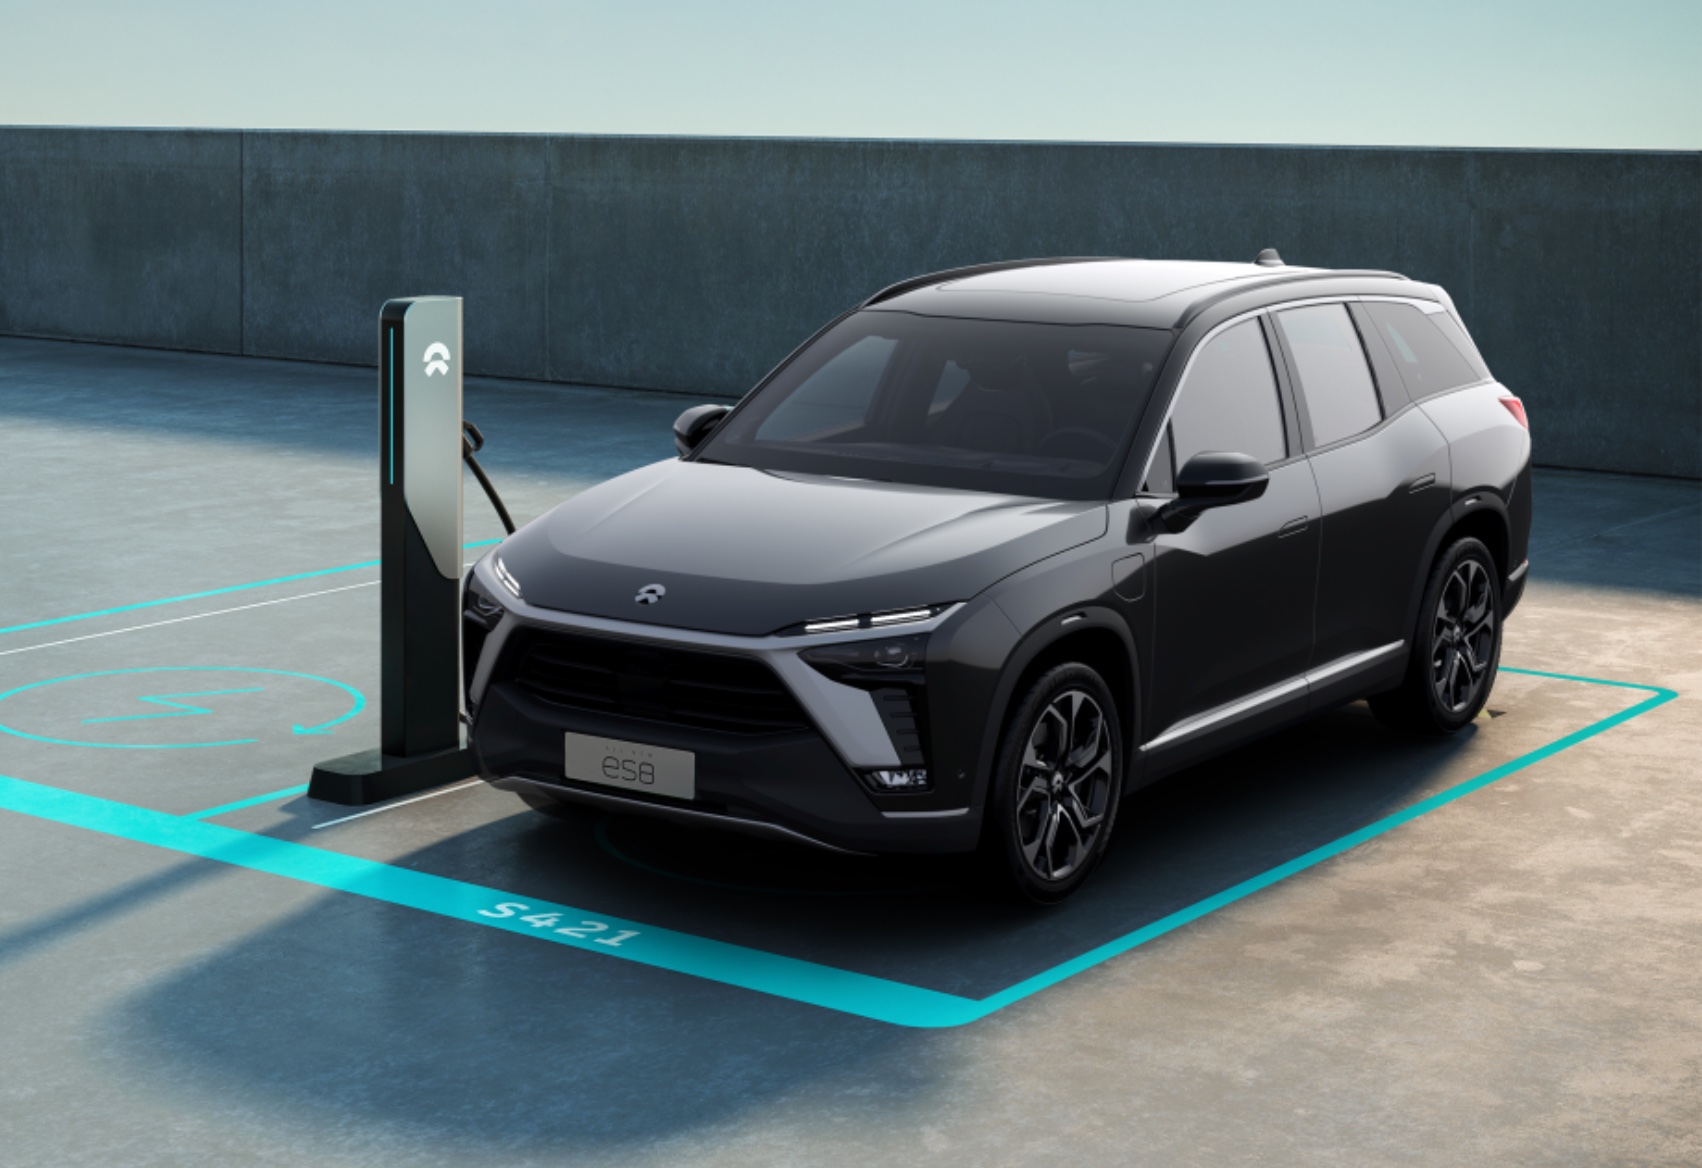 NIO sets up battery asset company, CATL has taken a stake-CnEVPost